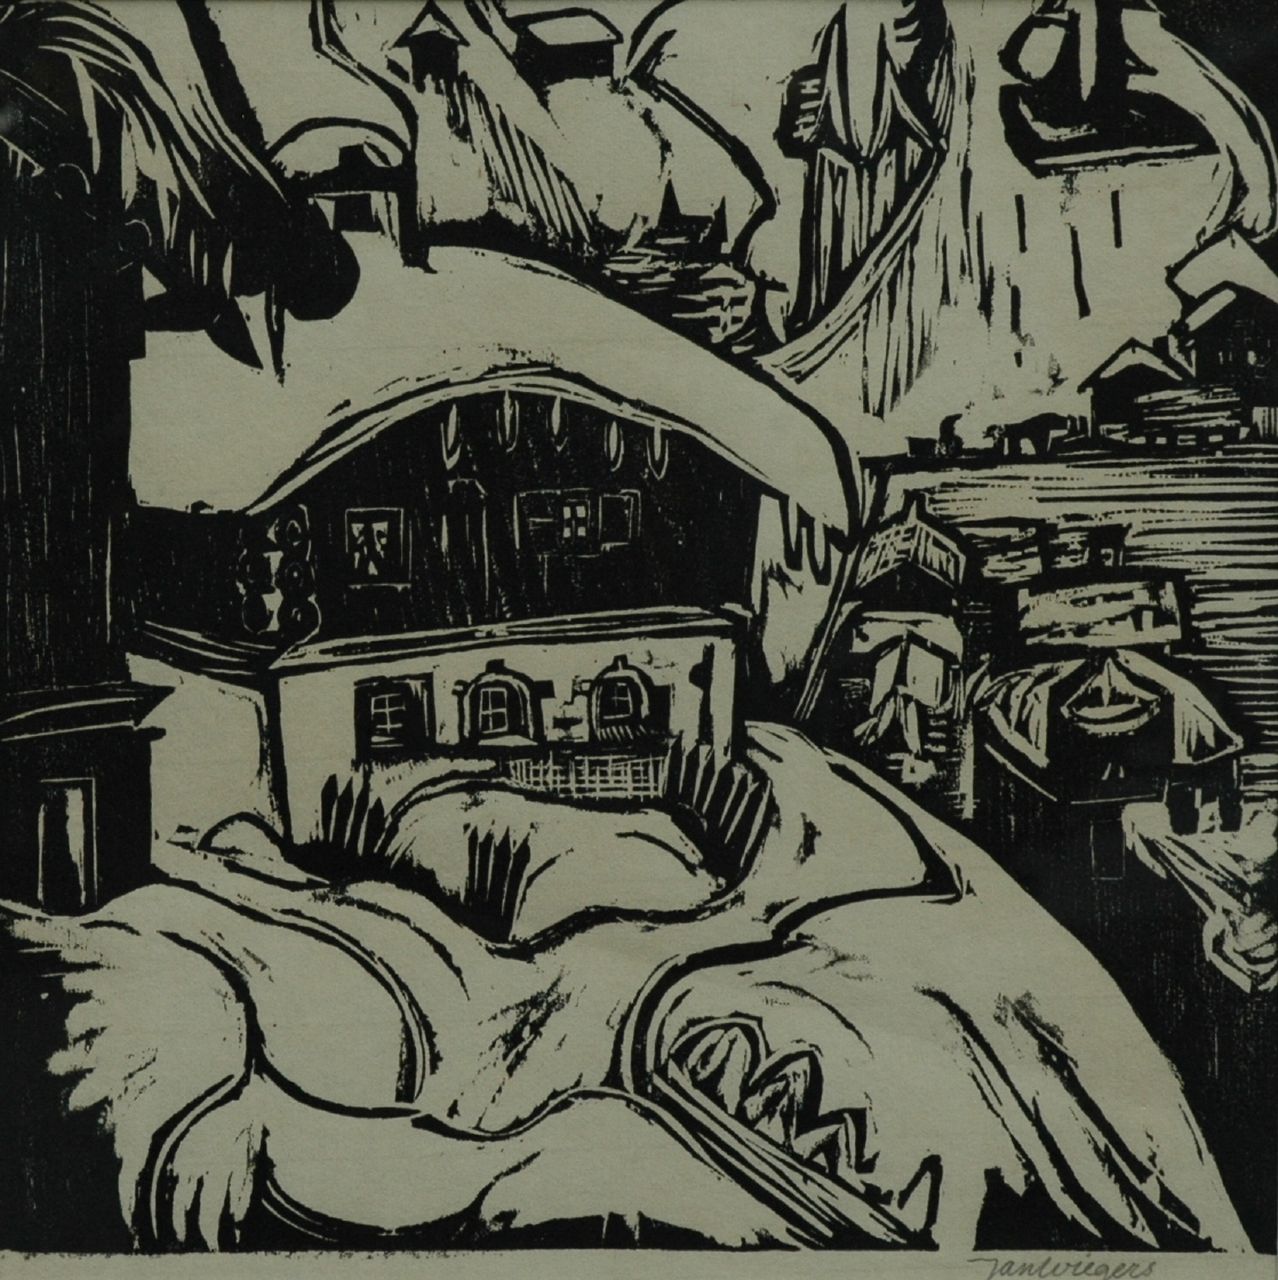 Wiegers J.  | Jan Wiegers, The house of Ernst Ludwig Kirchner, Davos, woodcut on paper 29.5 x 29.5 cm, signed l.r. in pencil